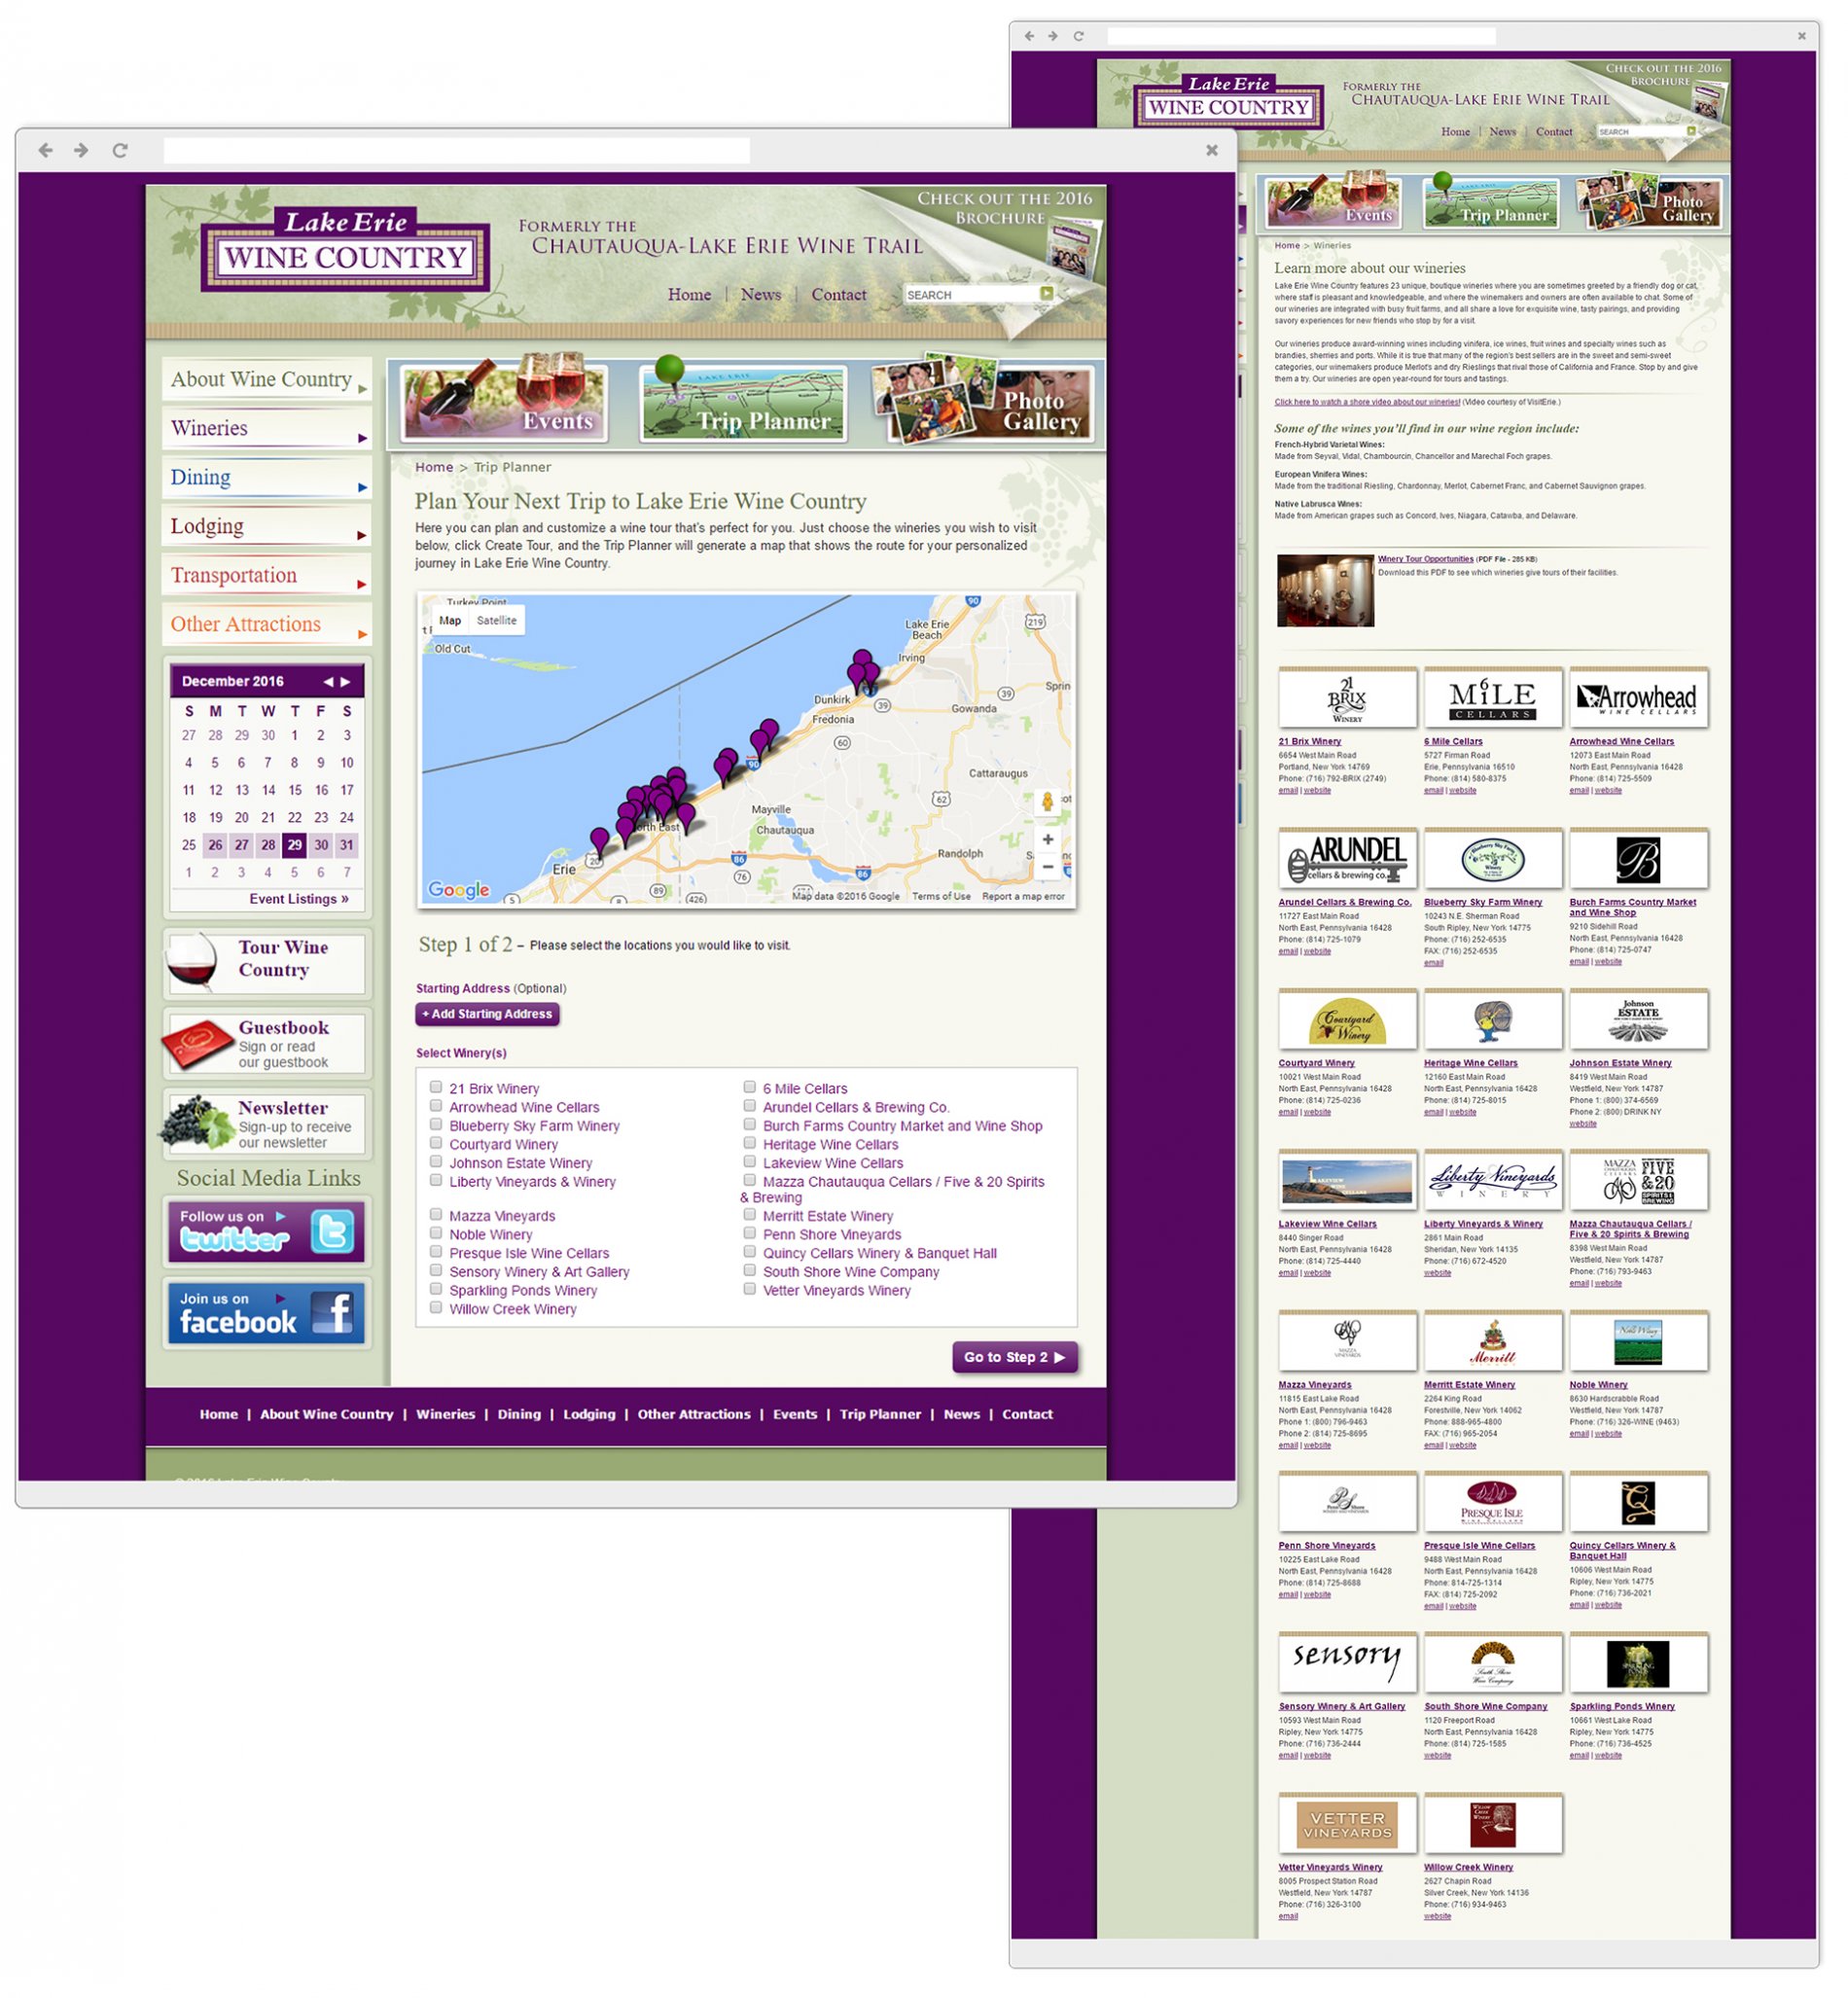 Interactive Winery Trip Planner & Complete Winery Directory